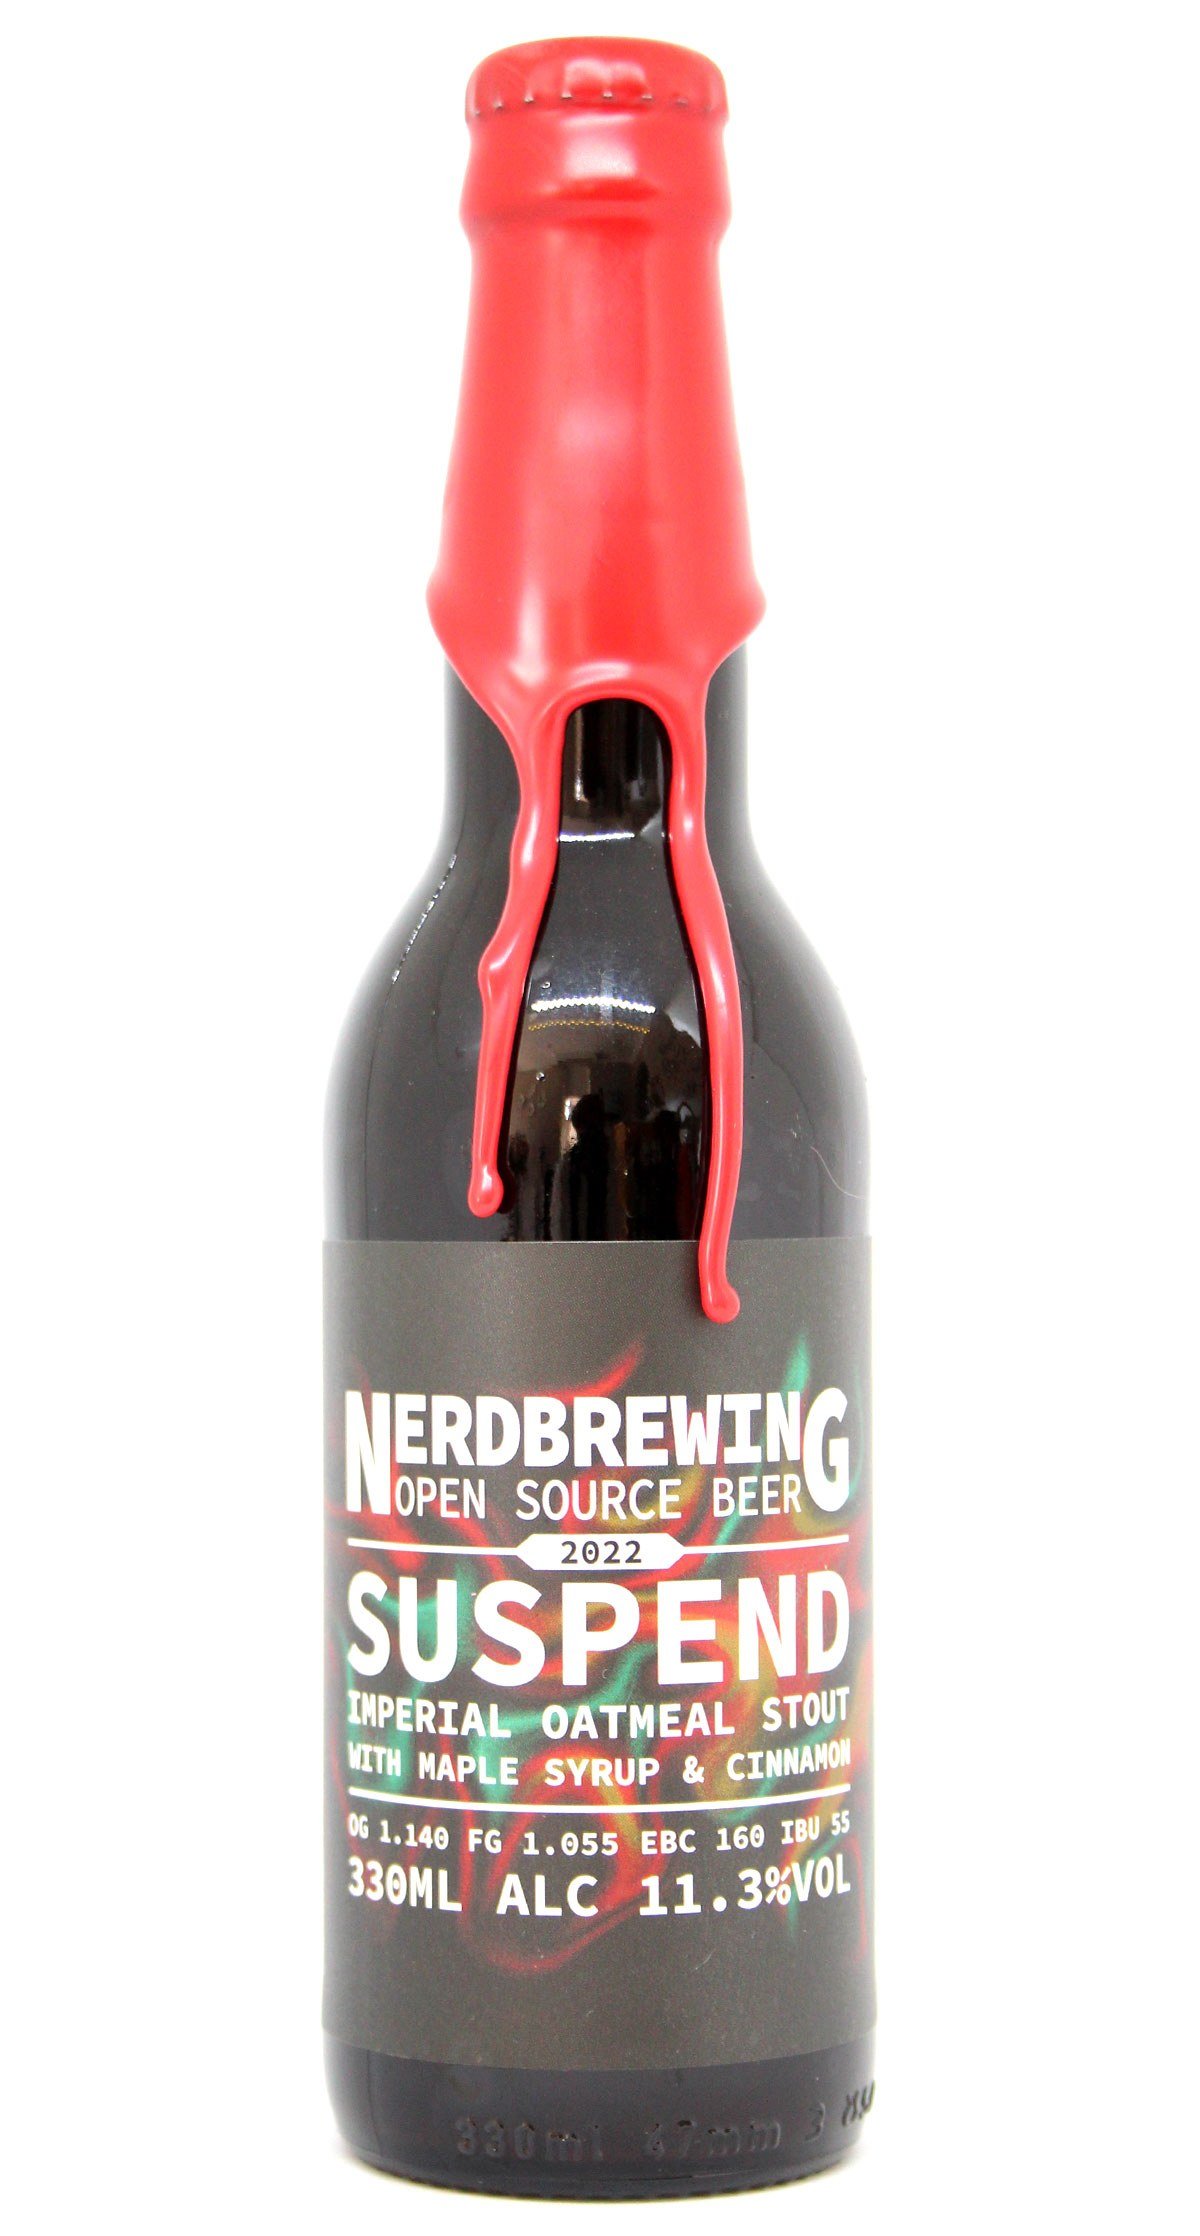 Suspend Imperial Oatmeat Stout w. Maple Syrup & Cinnamon